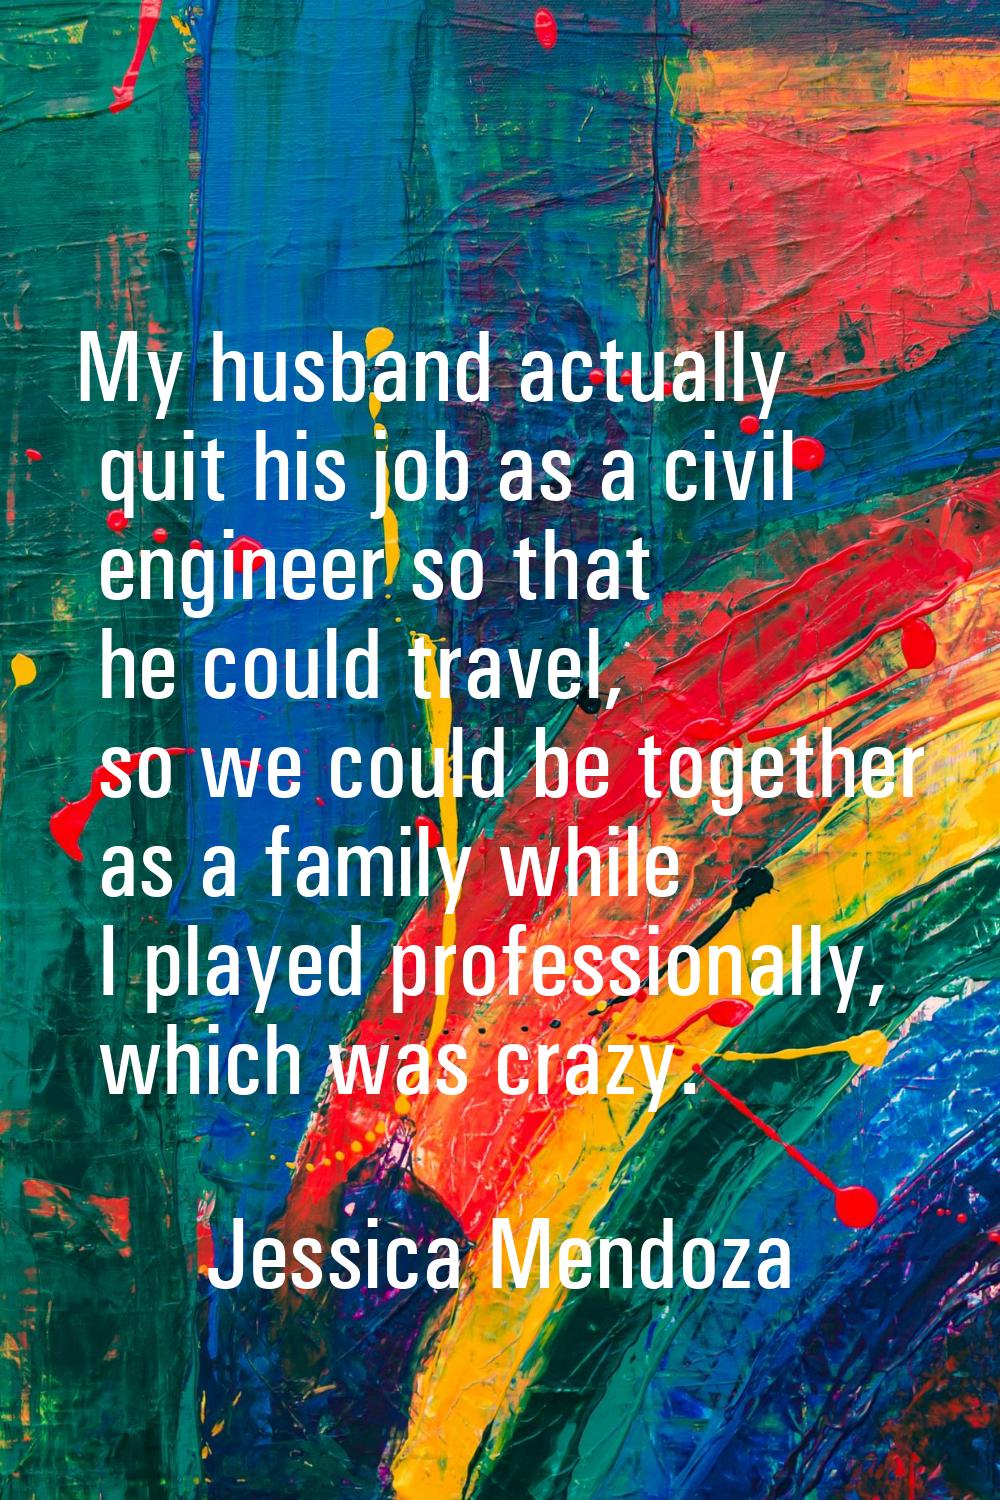 My husband actually quit his job as a civil engineer so that he could travel, so we could be togeth